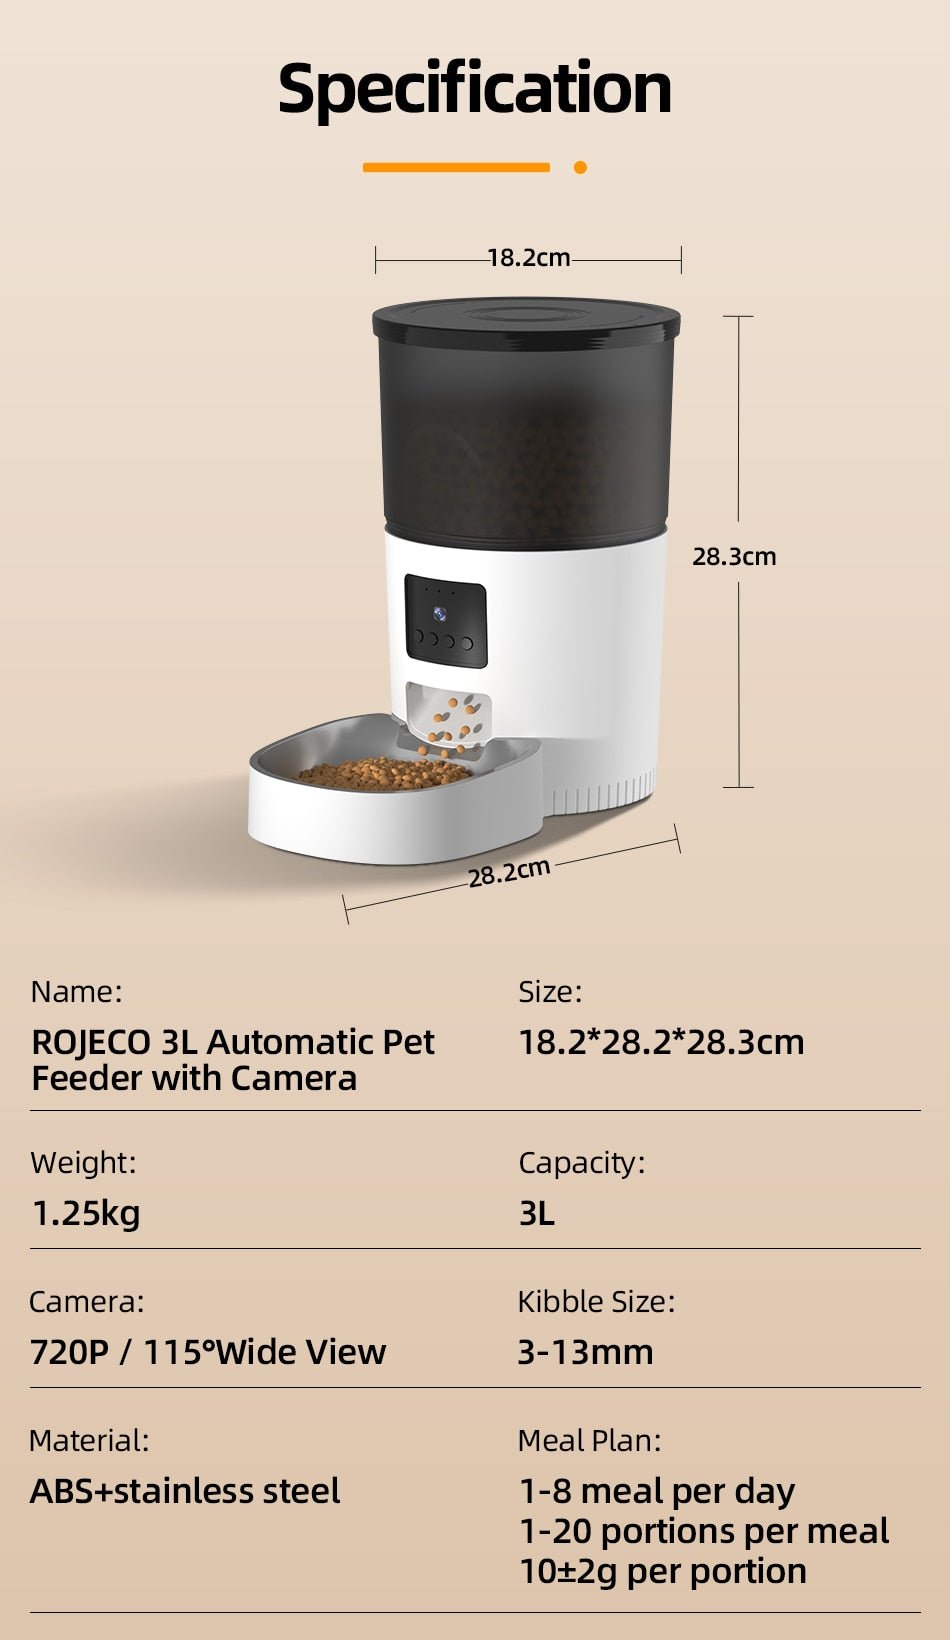 ROJECO AUTOMATIC SMART CAMERA CAT FEEDER - New Forest Pets